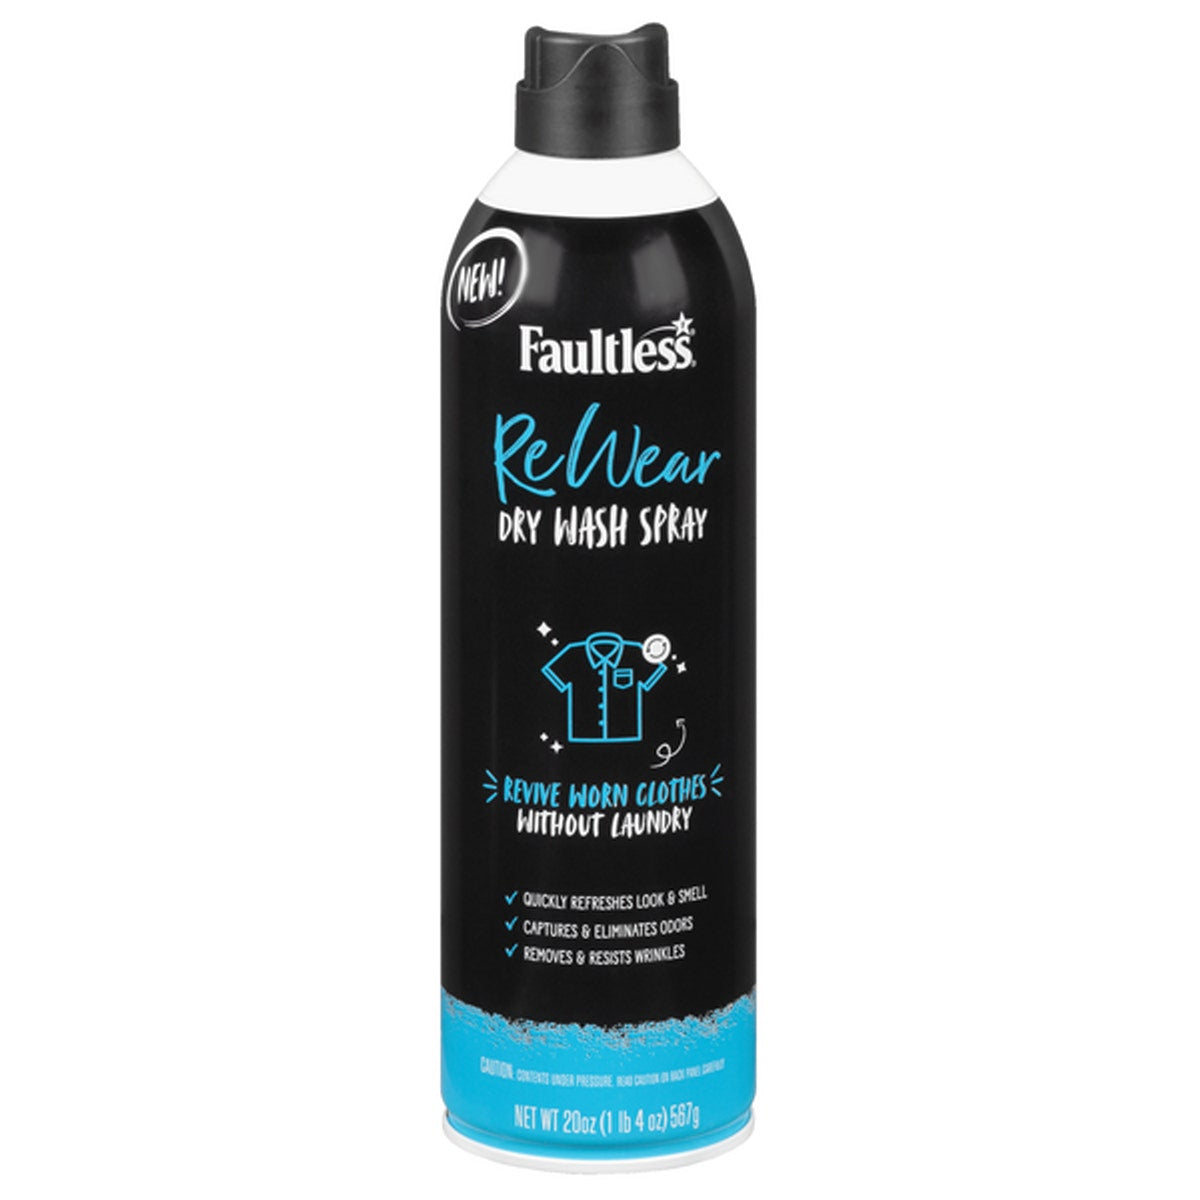 Faultless Clothing Revival Spray – Refreshes Without Washing